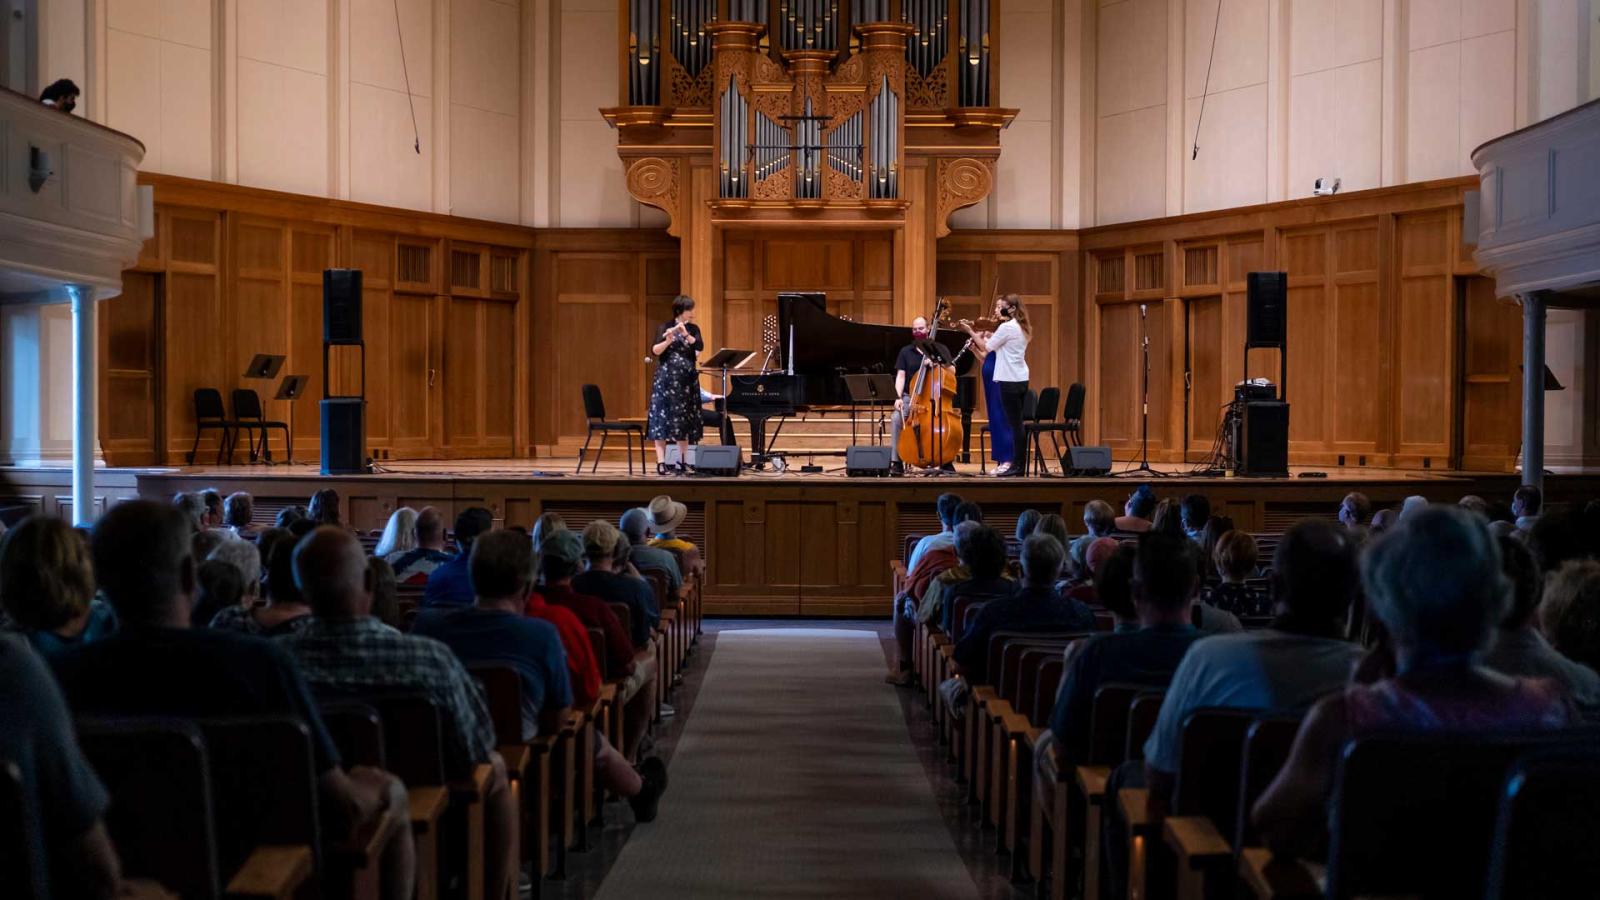 Decoda and Adriel Denae perform in front of a full audience on stage in Memorial Chapel.